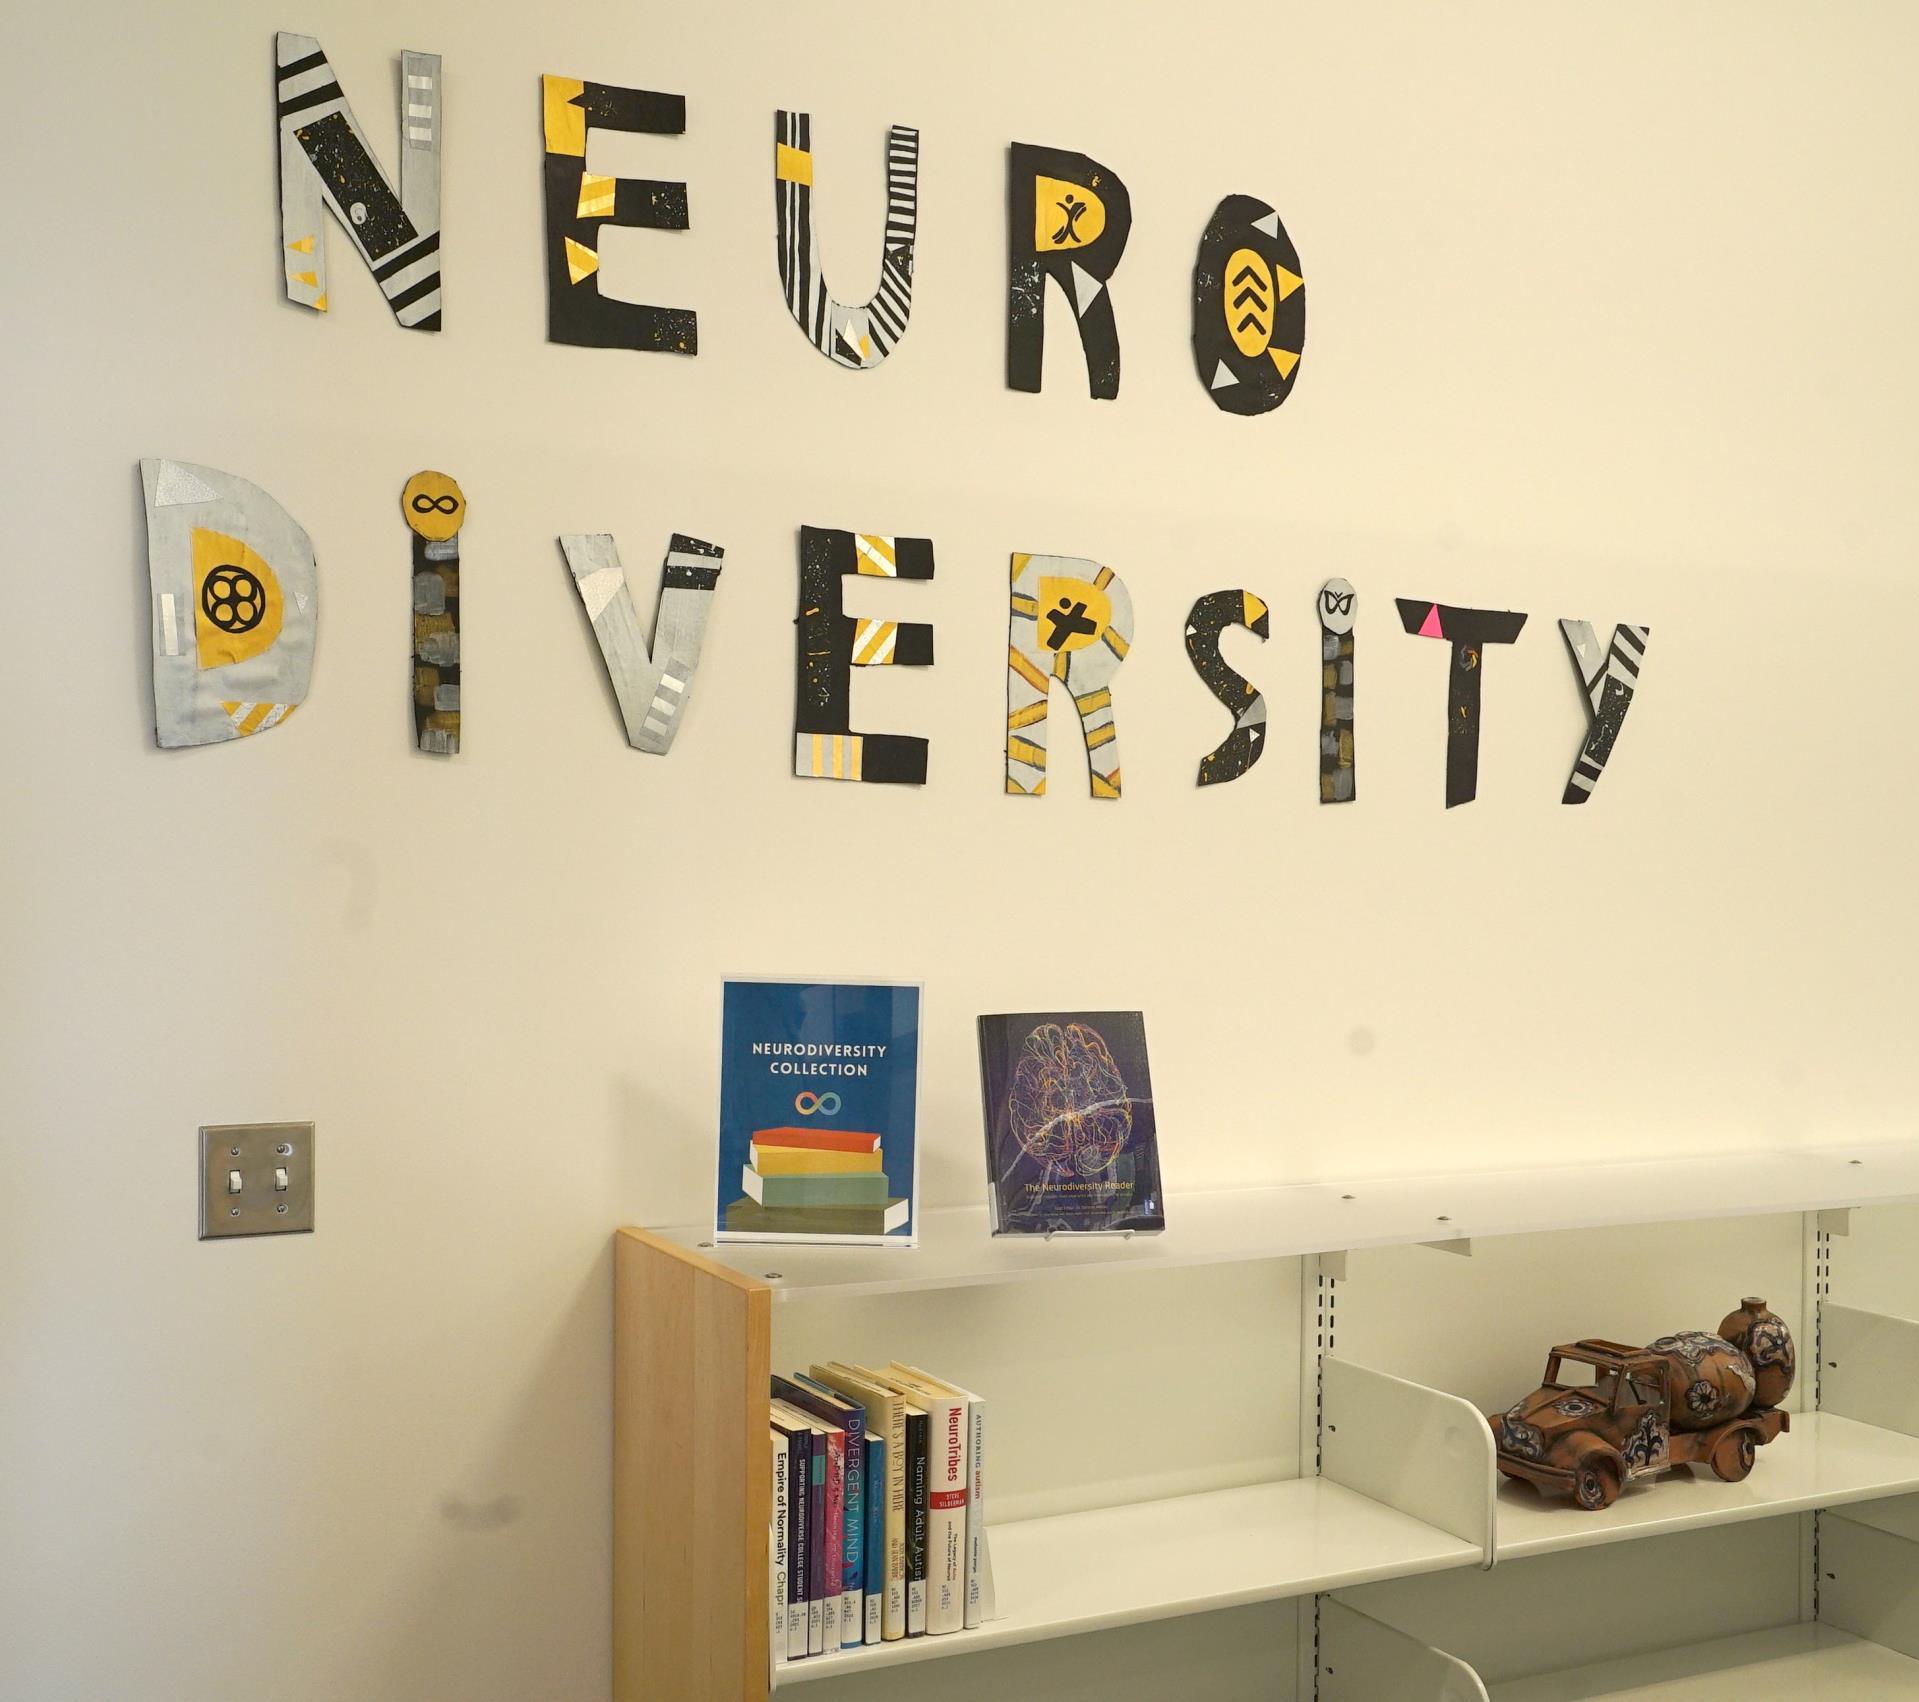 neurodiversity collection sign and bookshelf at the library